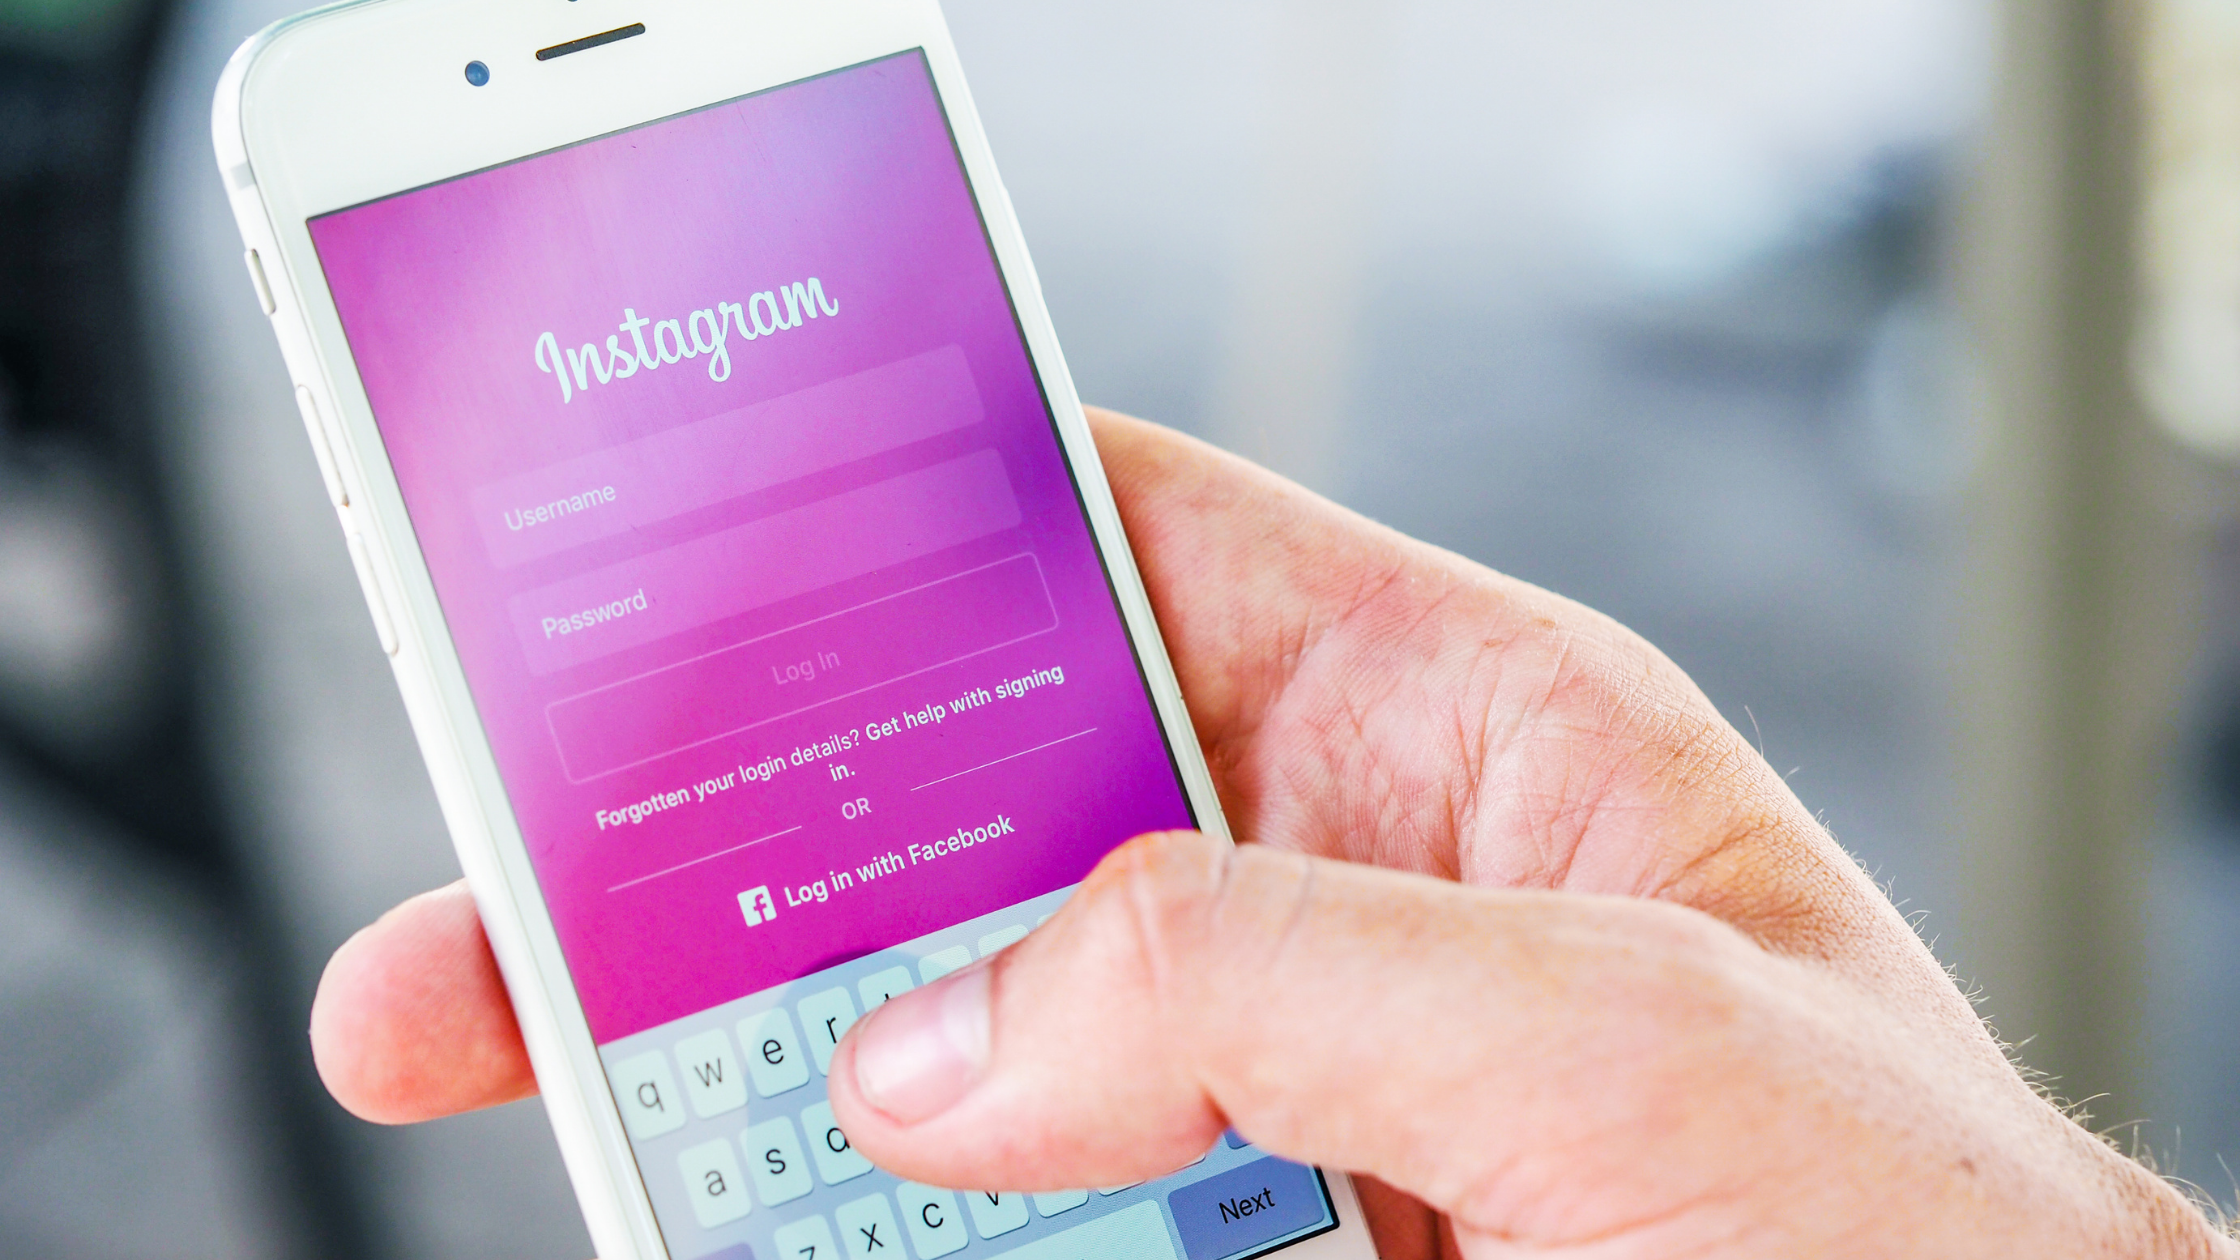 How to delete messages on Instagram